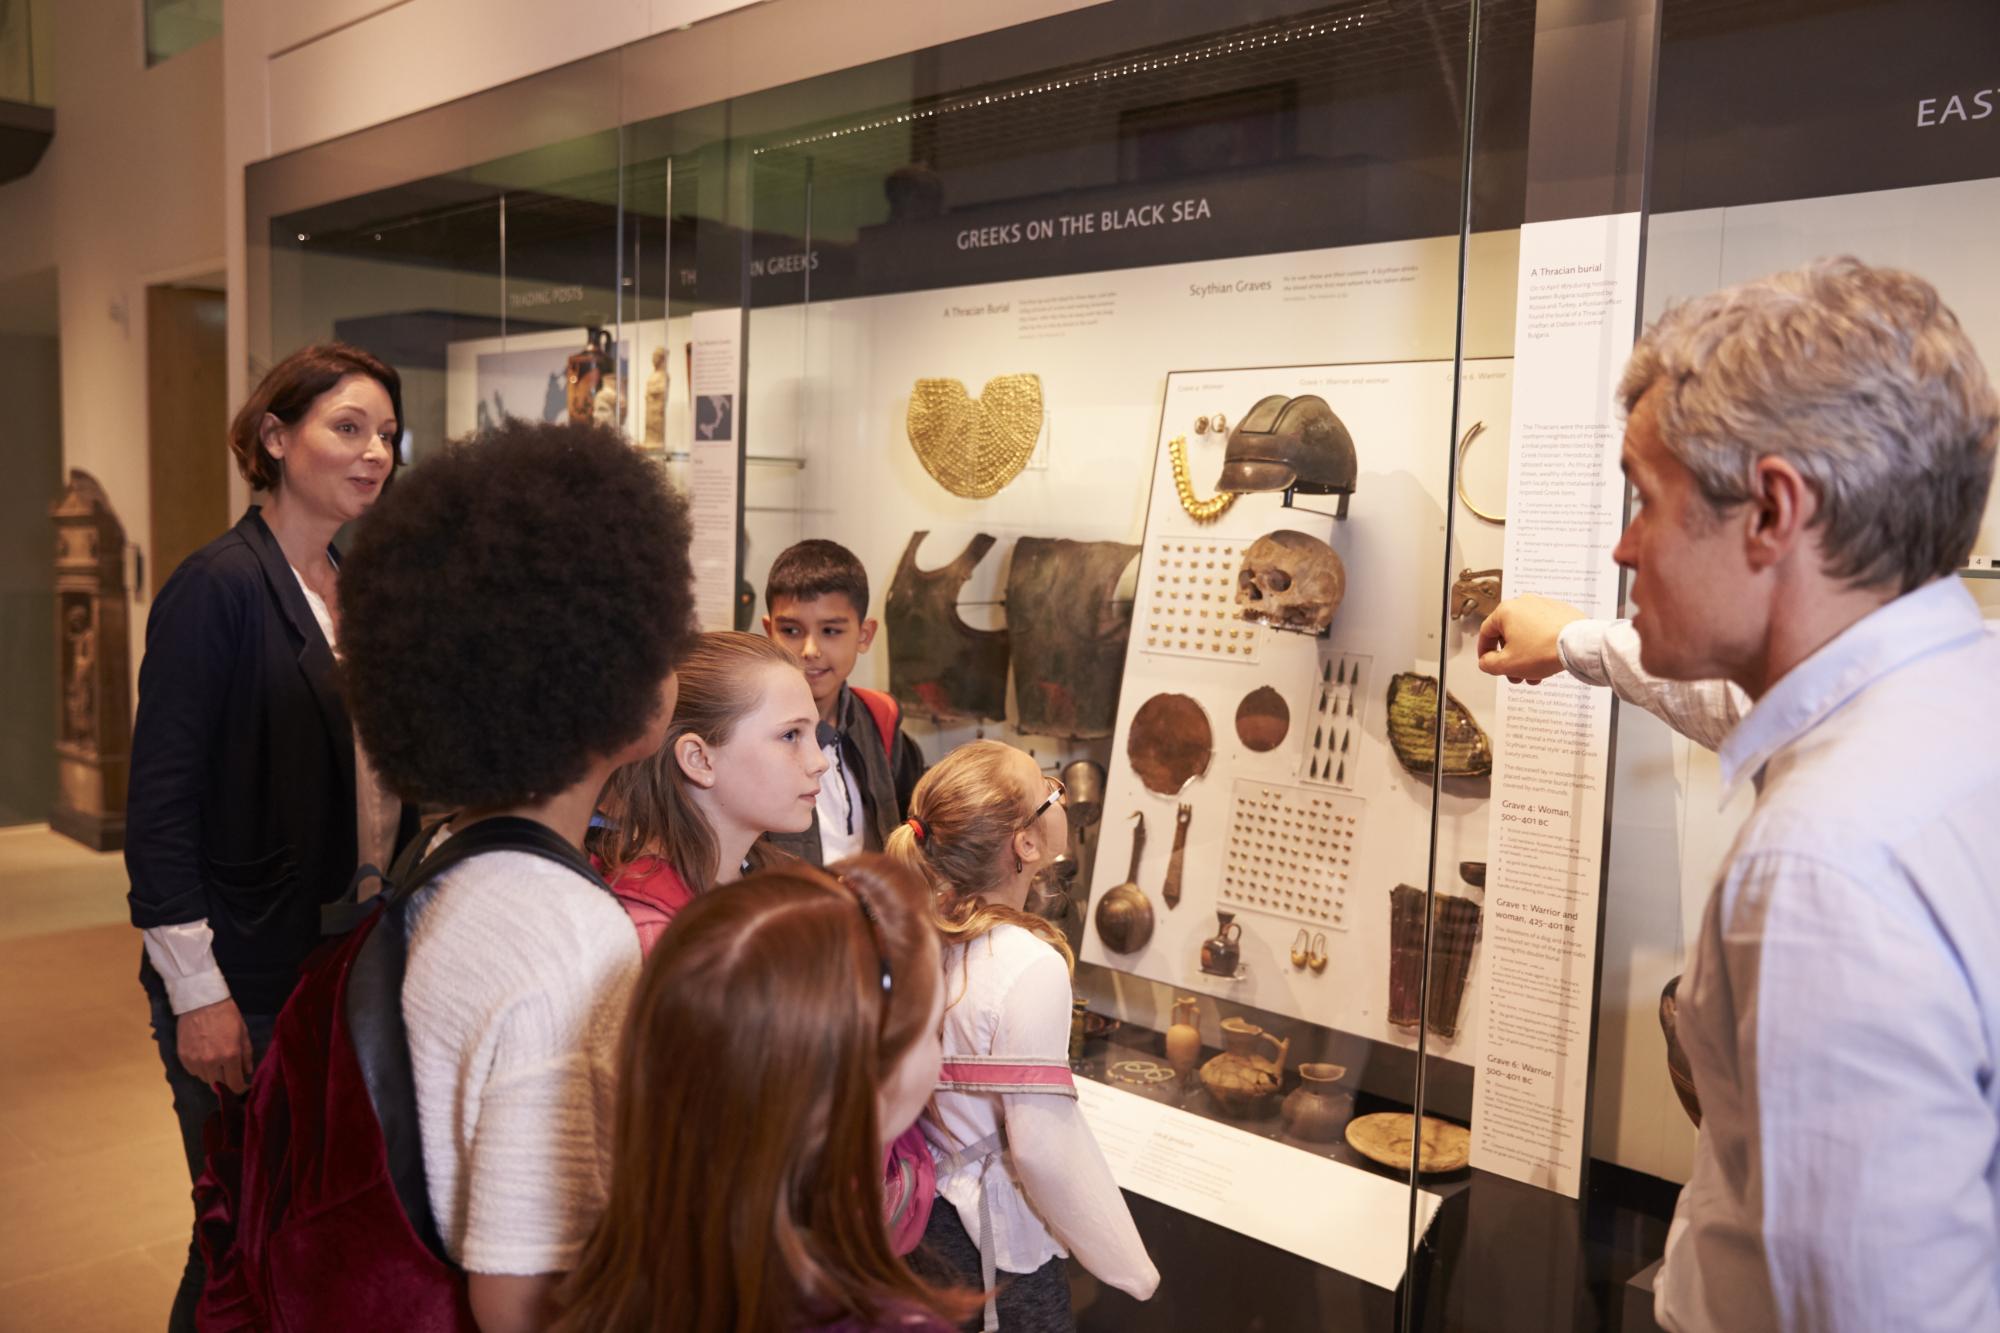 Kids Looking At Artifacts In Case On Trip To Museum